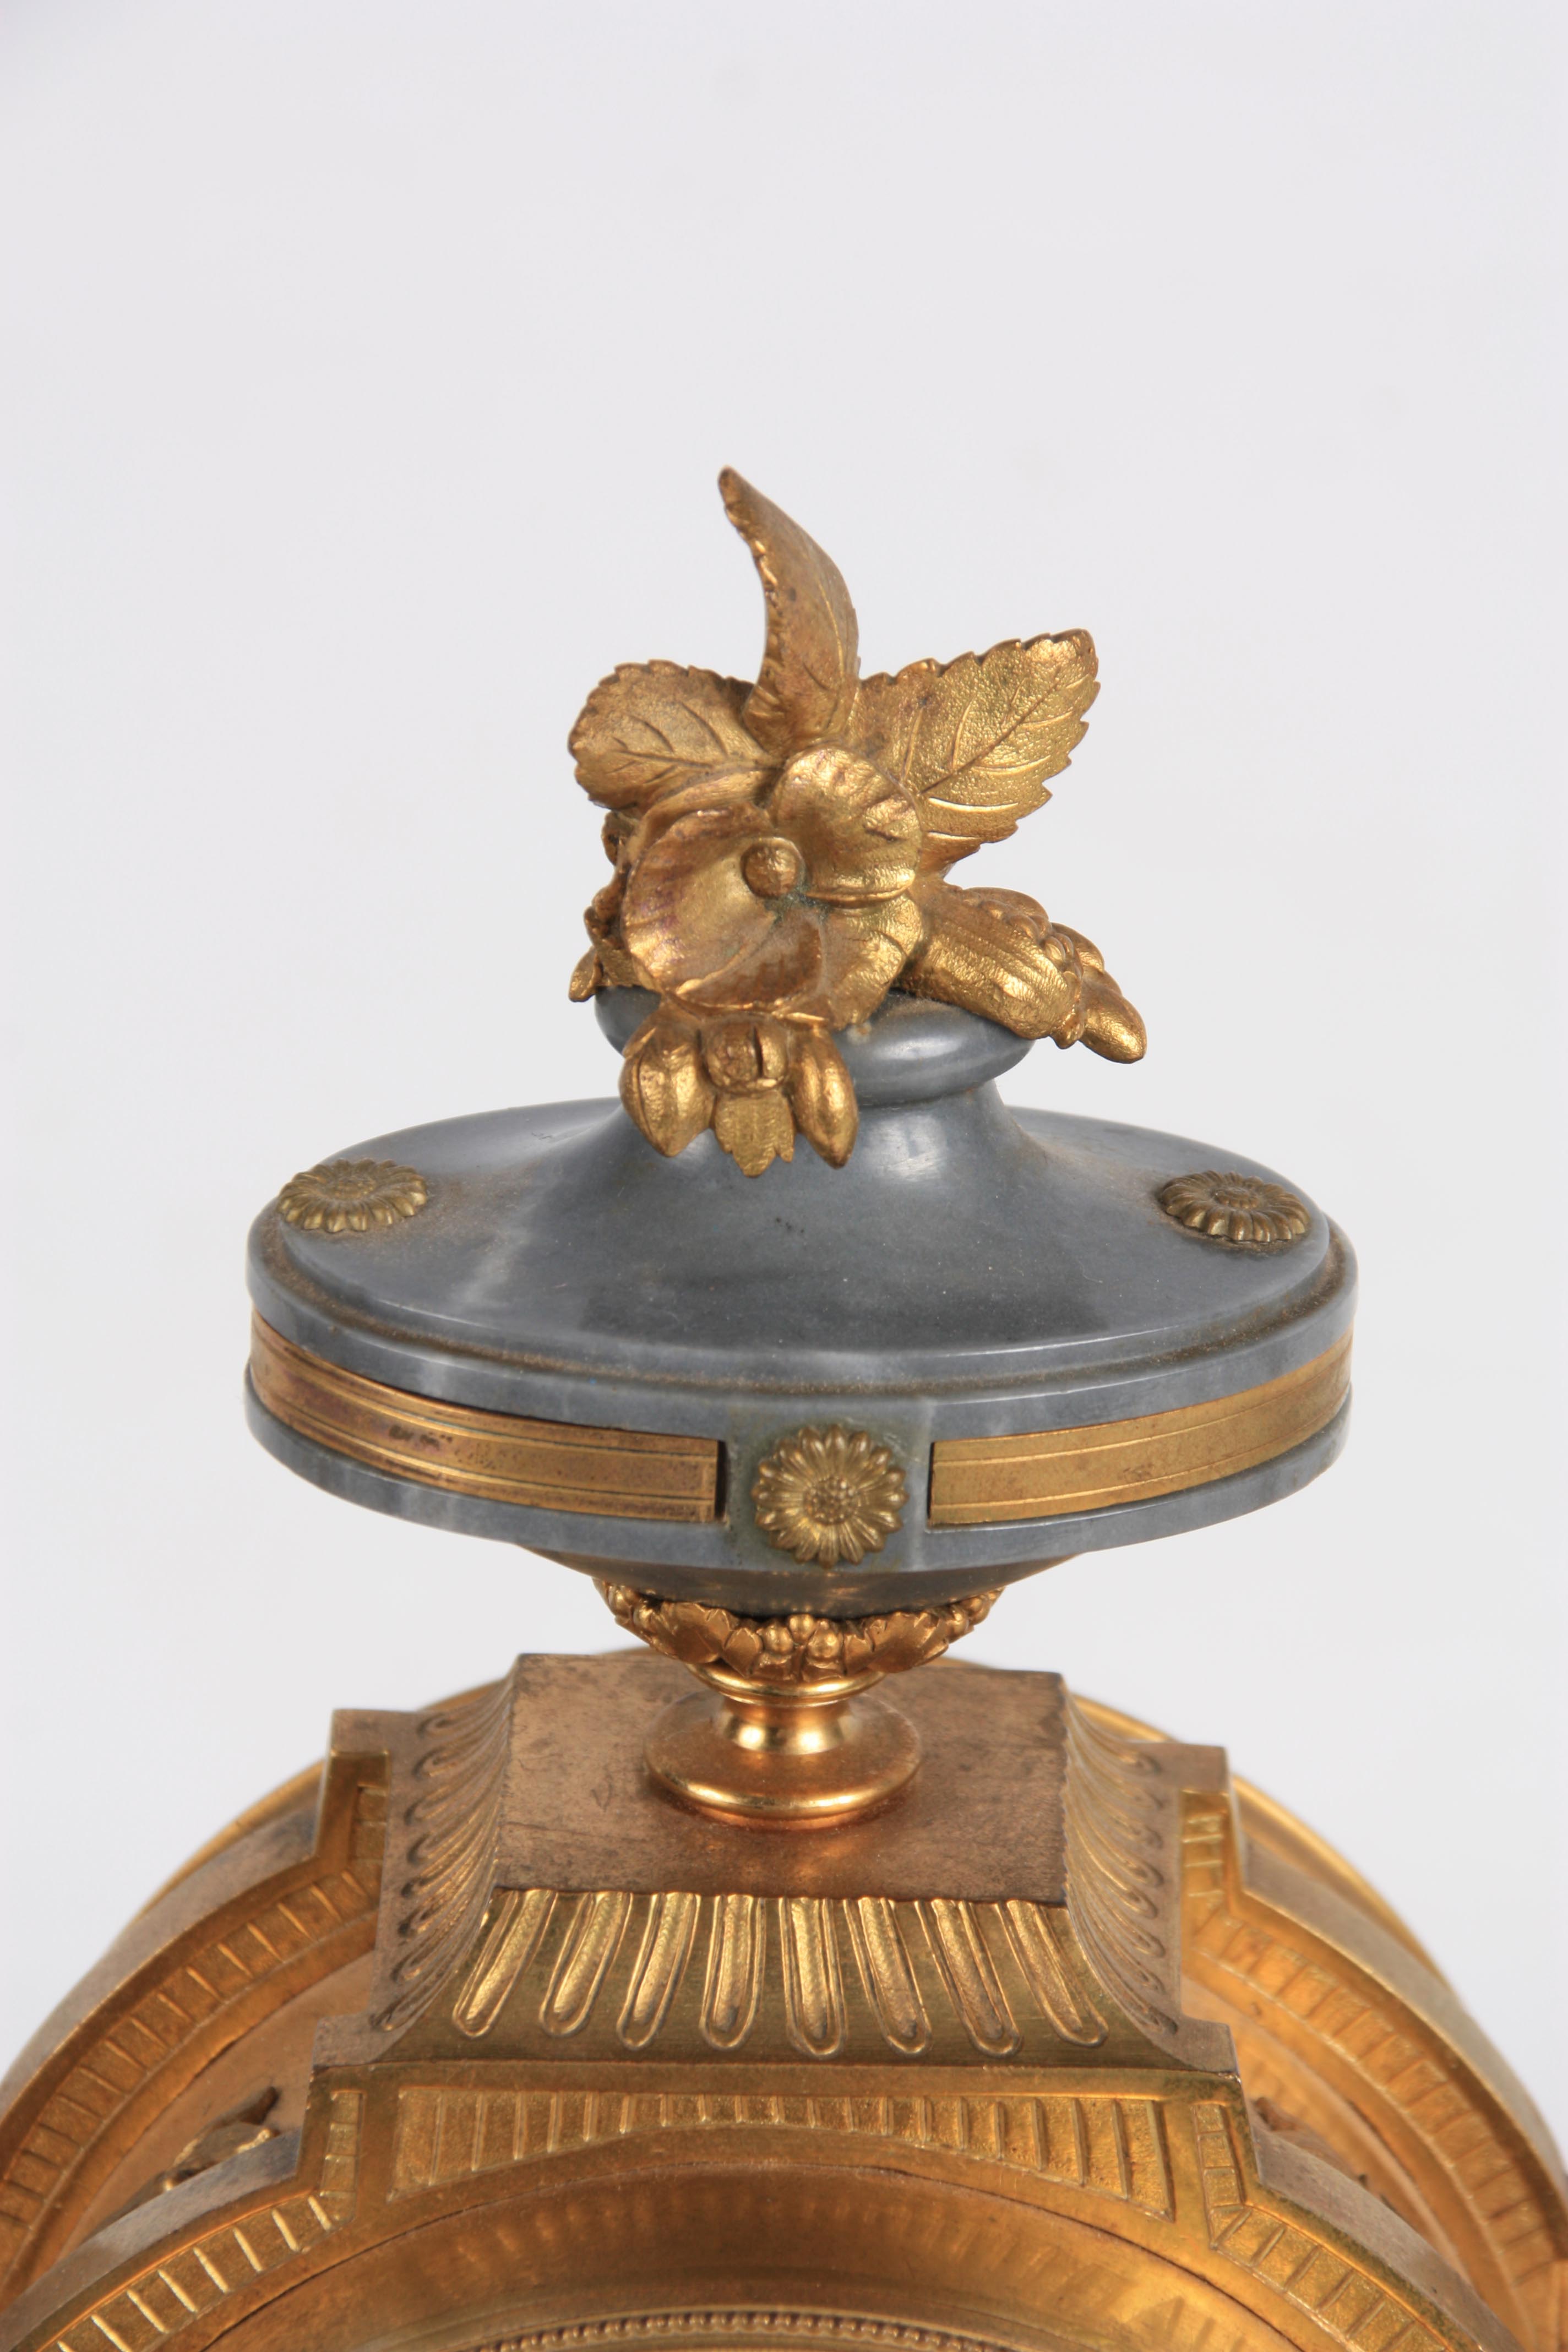 LEMERLE-CHARPENTIER & CIE, PARIS A MID 19TH CENTURY FRENCH MARBLE AND ORMOLU CLOCK GARNITURE the - Image 6 of 14